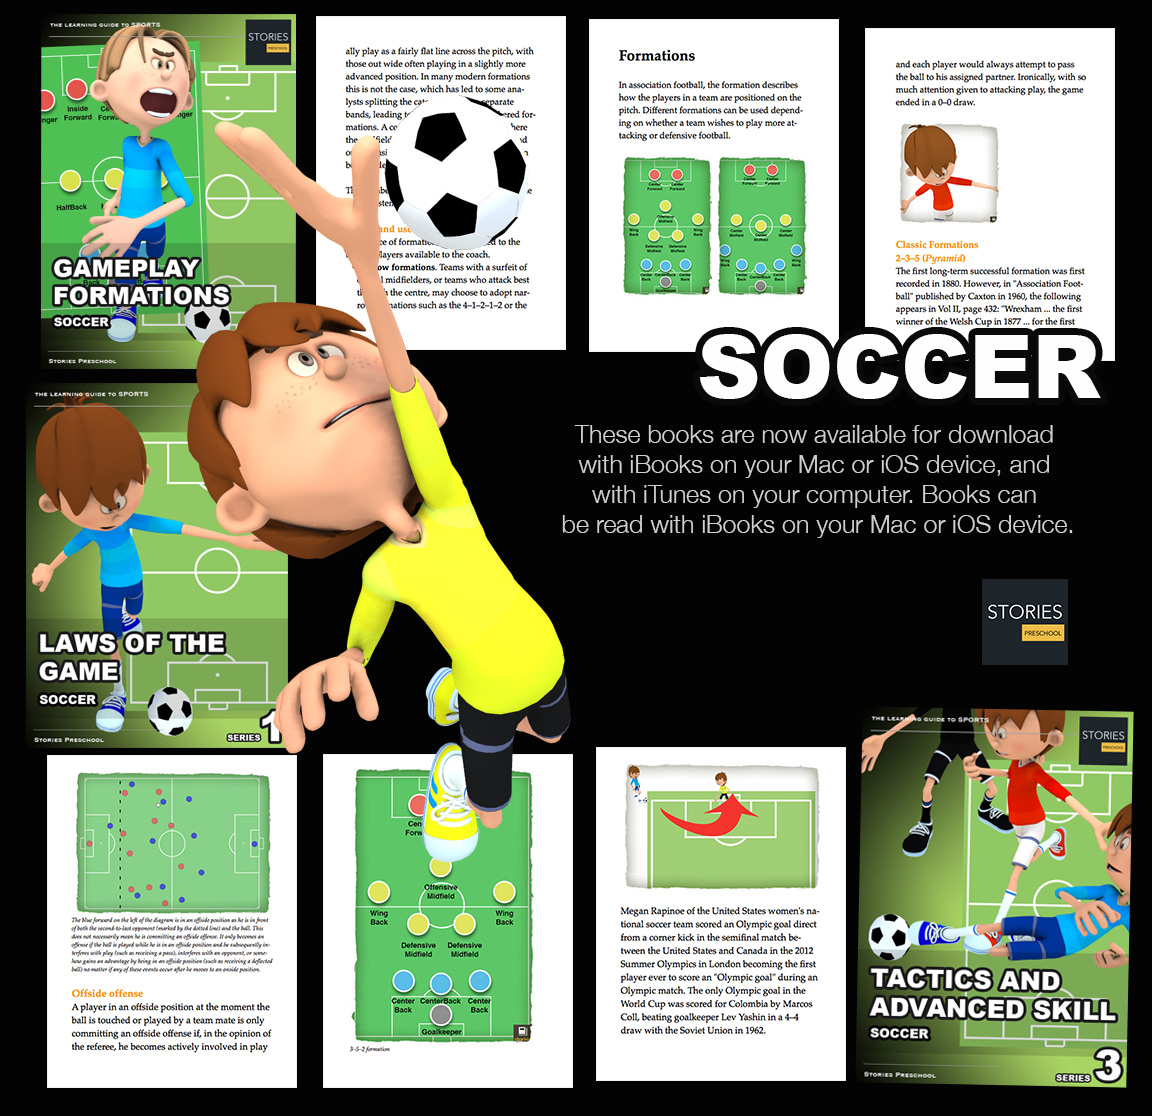 Soccer Apple Books: Soccer is a sport played between two teams of eleven players with a spherical ball. The object of the game is to score by getting the ball into the opposing goal | Stories Preschool